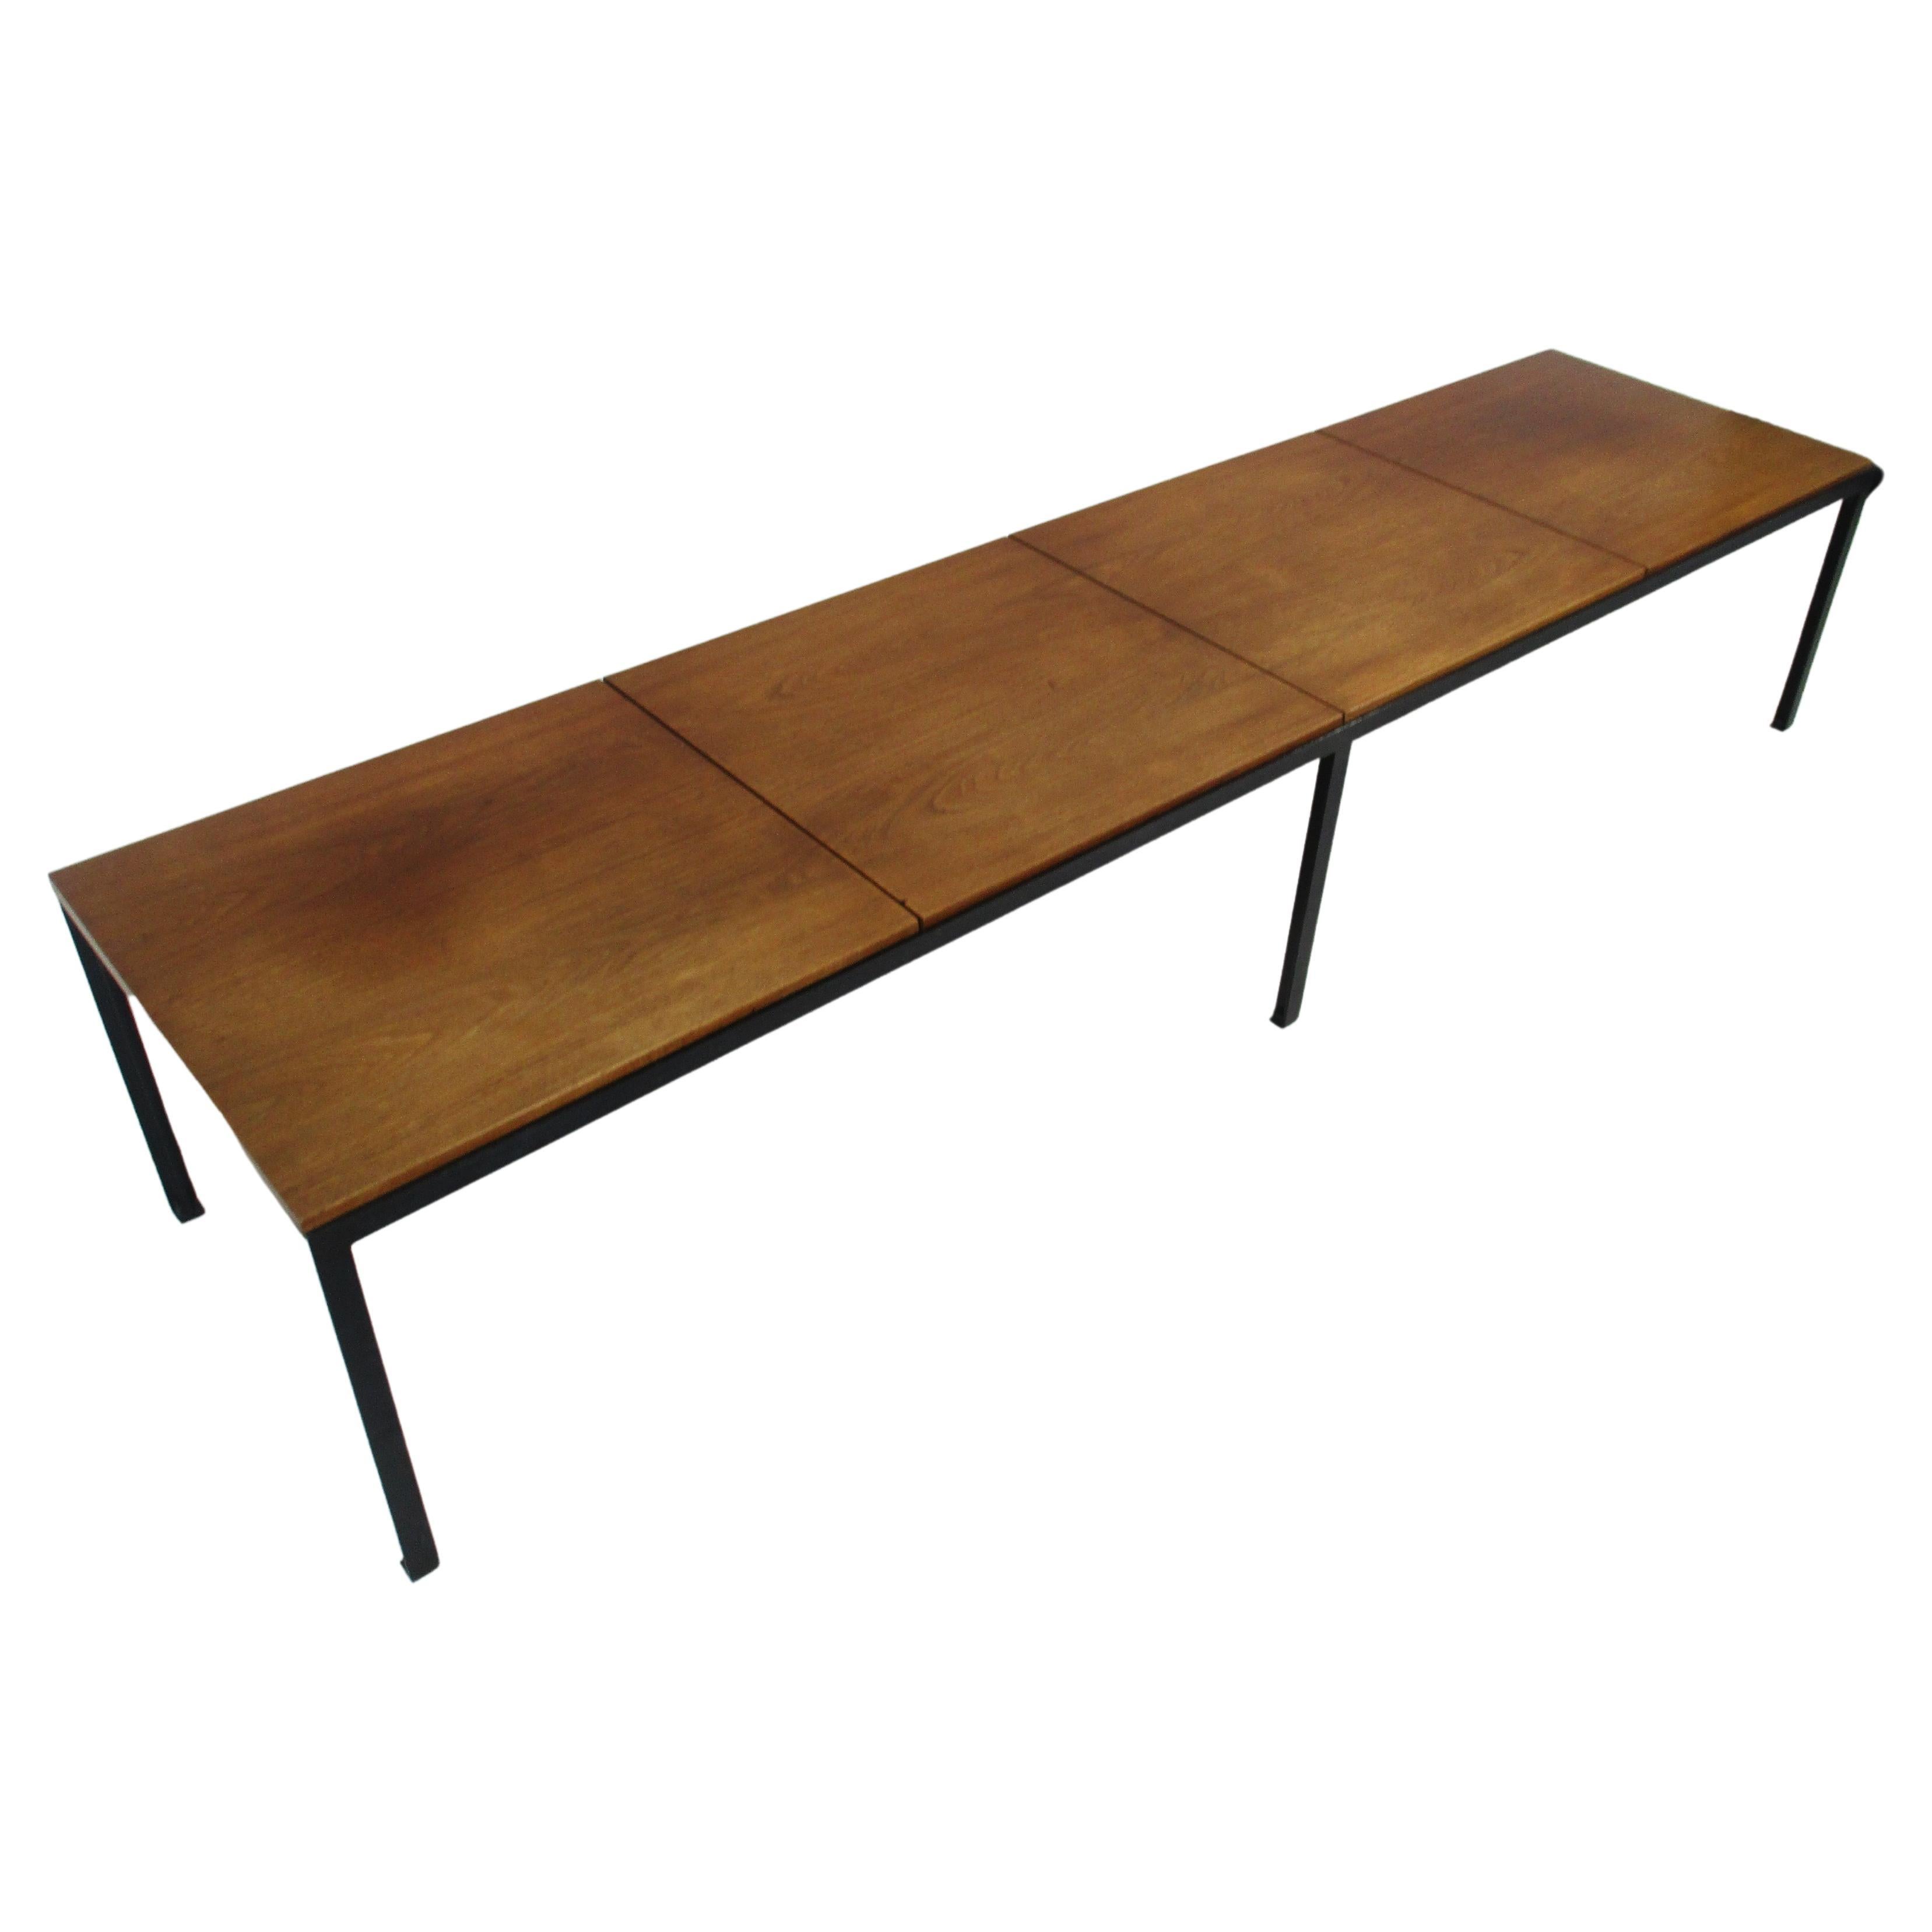 Early T Angle Walnut Coffee Table / Bench by Florence Knoll # 332 for Knoll (B) 